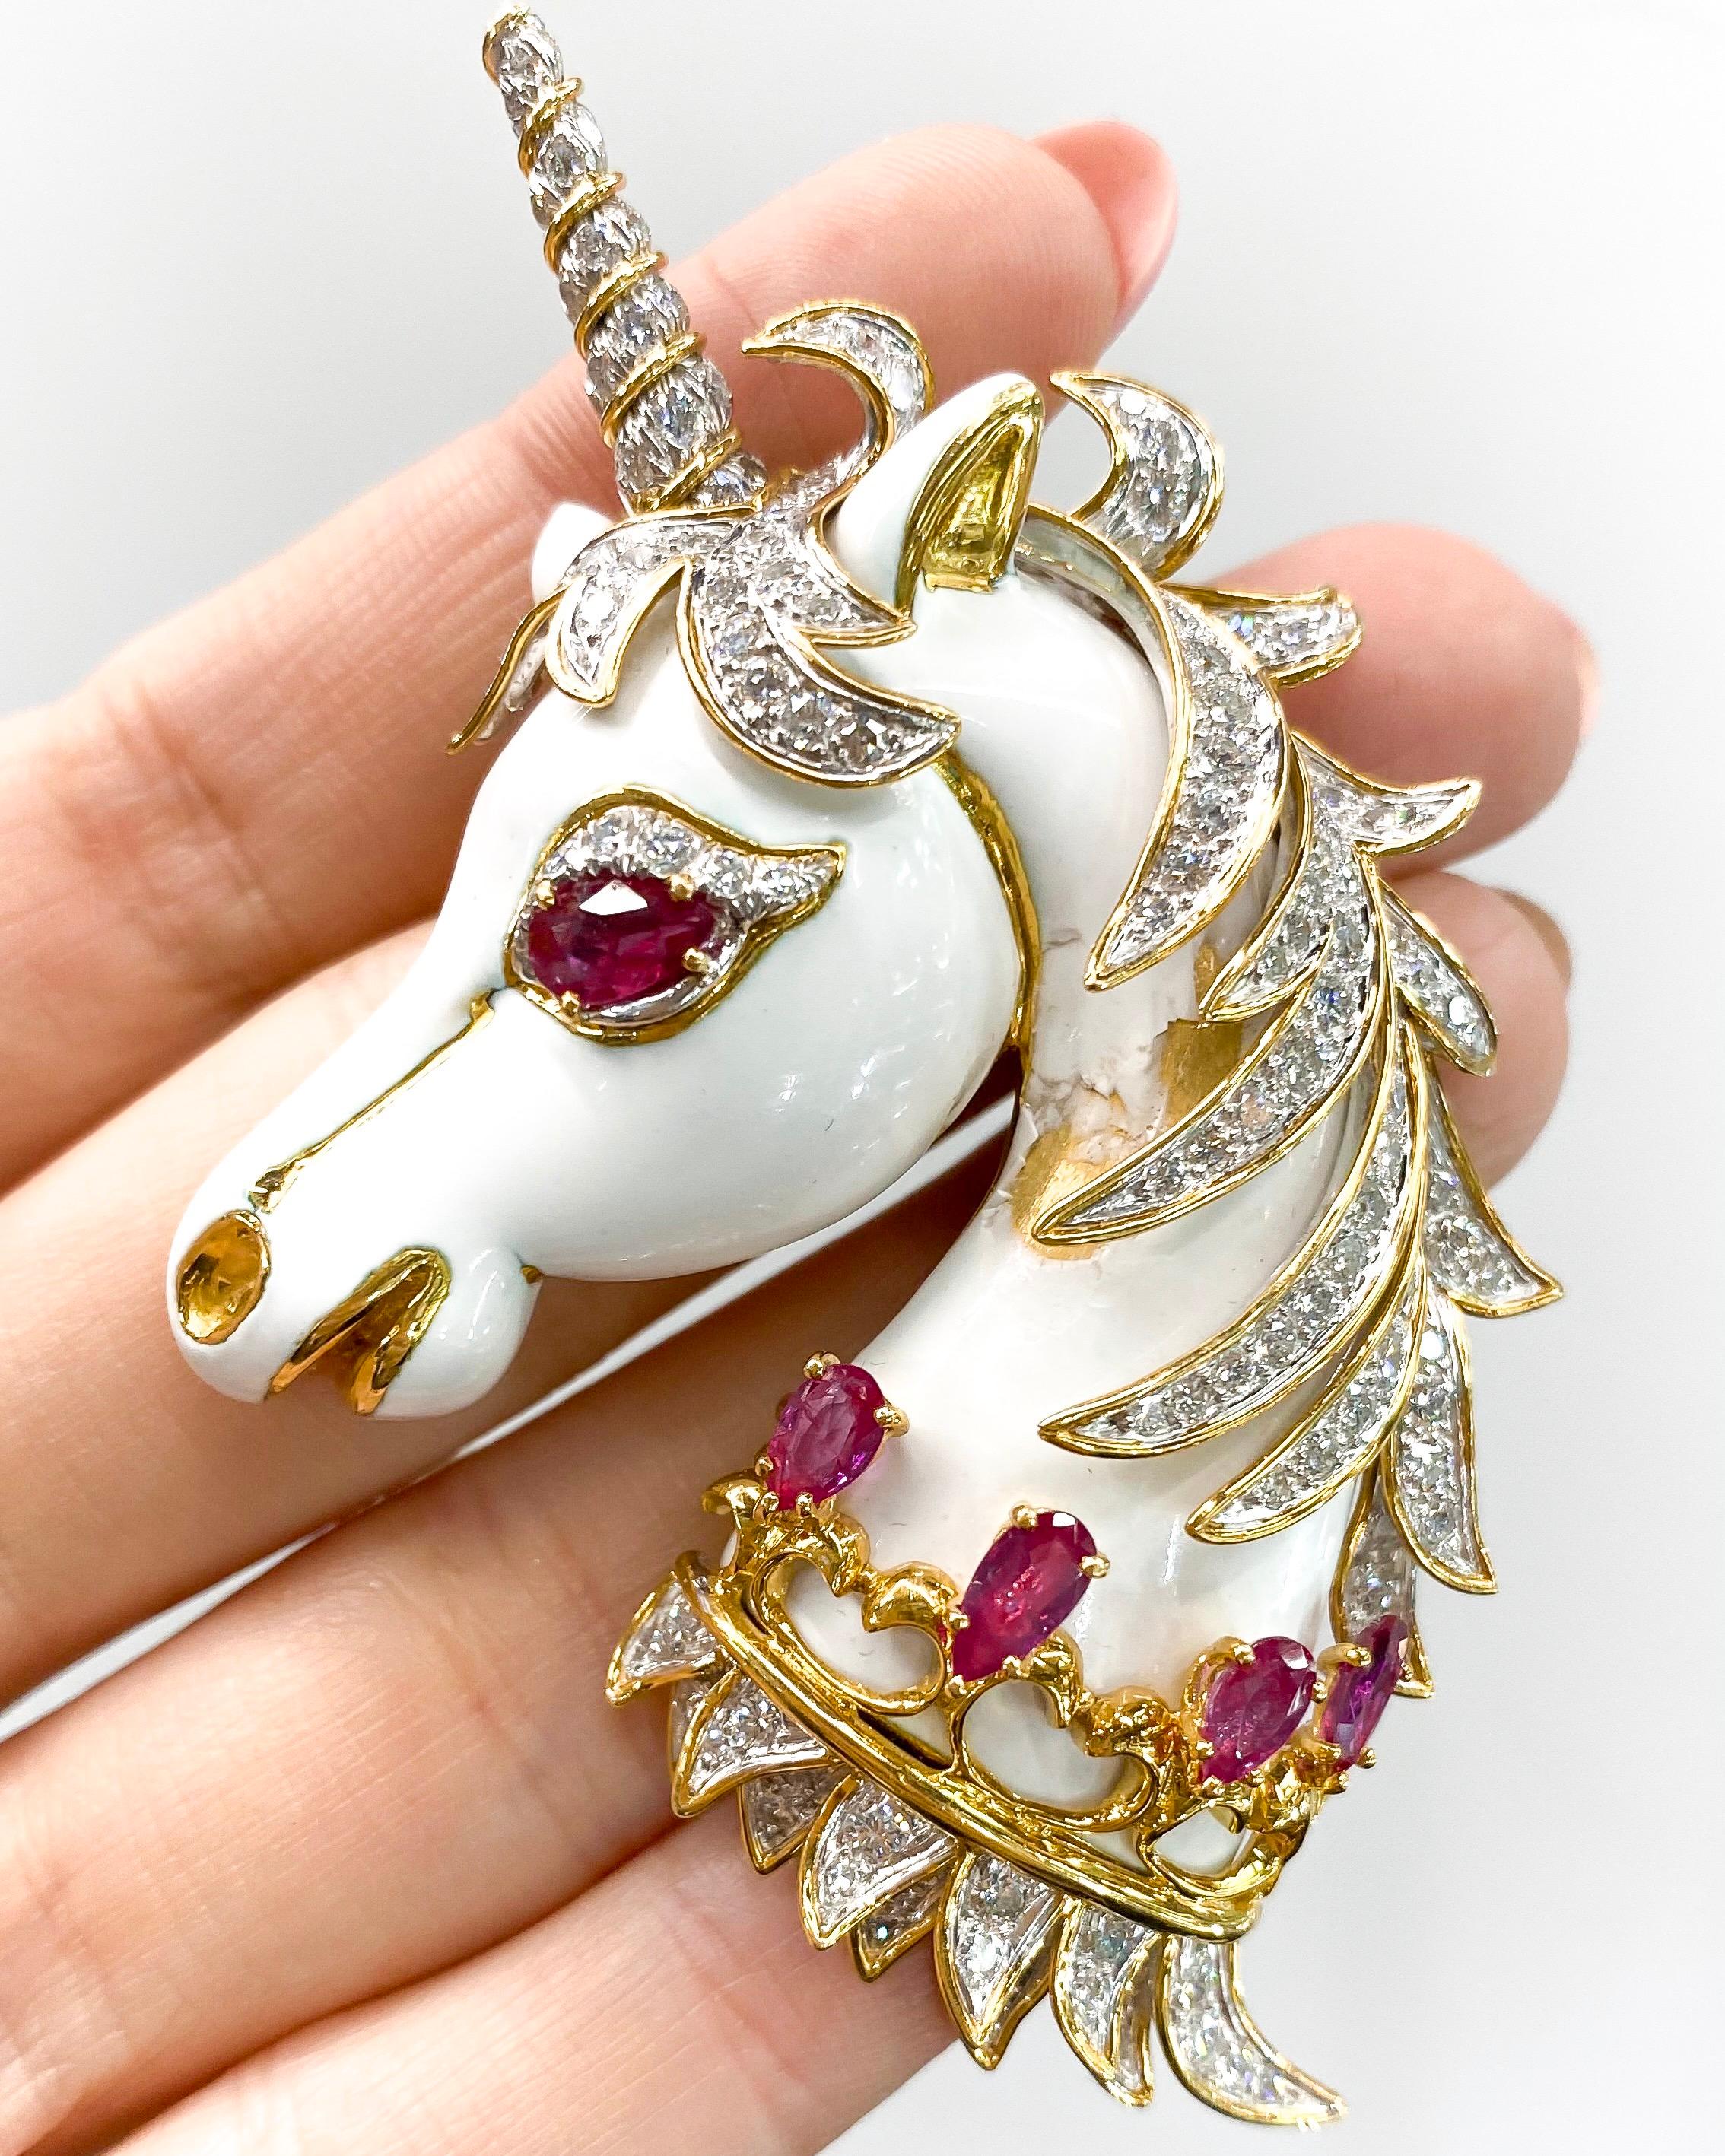 David Webb White Unicorn 18 Karat Yellow Gold Enamel, Diamonds, Rubies Brooch In Excellent Condition For Sale In New York, NY